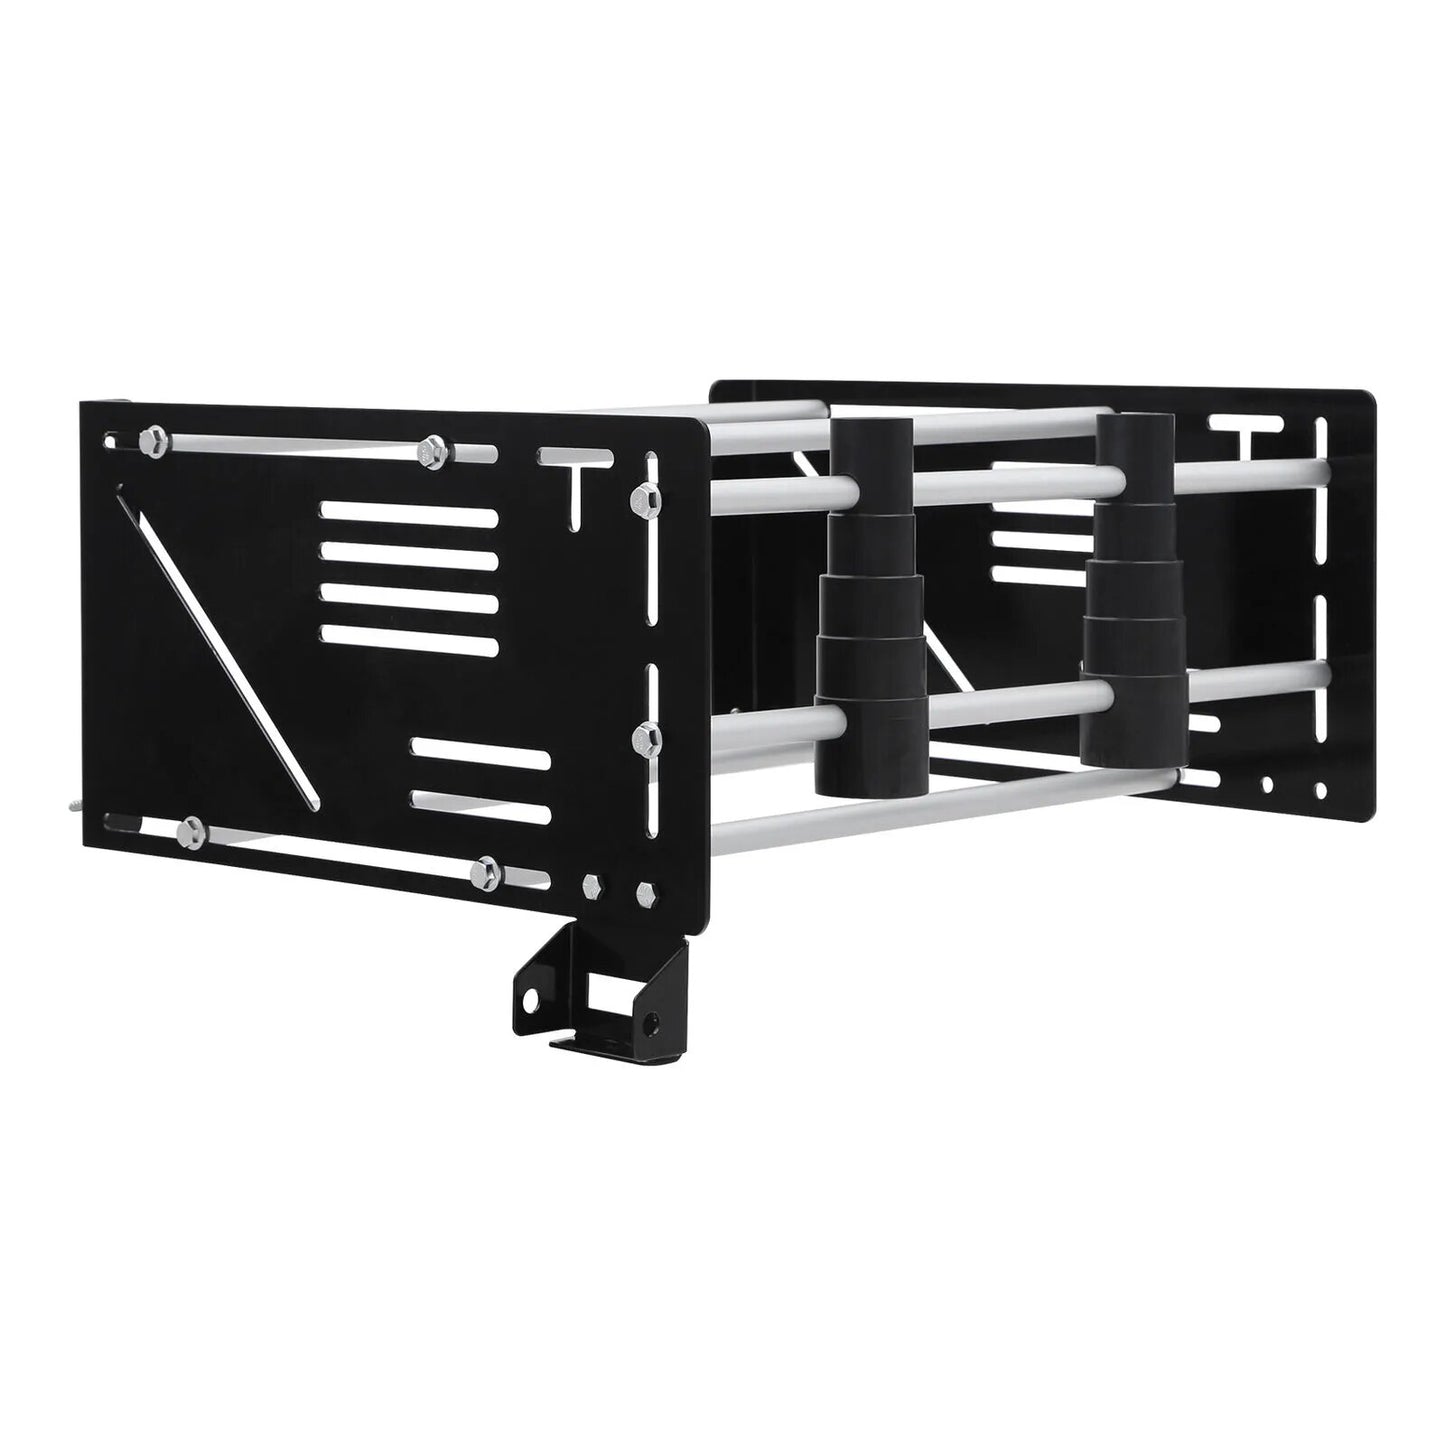 Voodoo Cycle House Wall Mount Tour Pack & Accessories Storage Rack For Harley-Davidson Touring Models